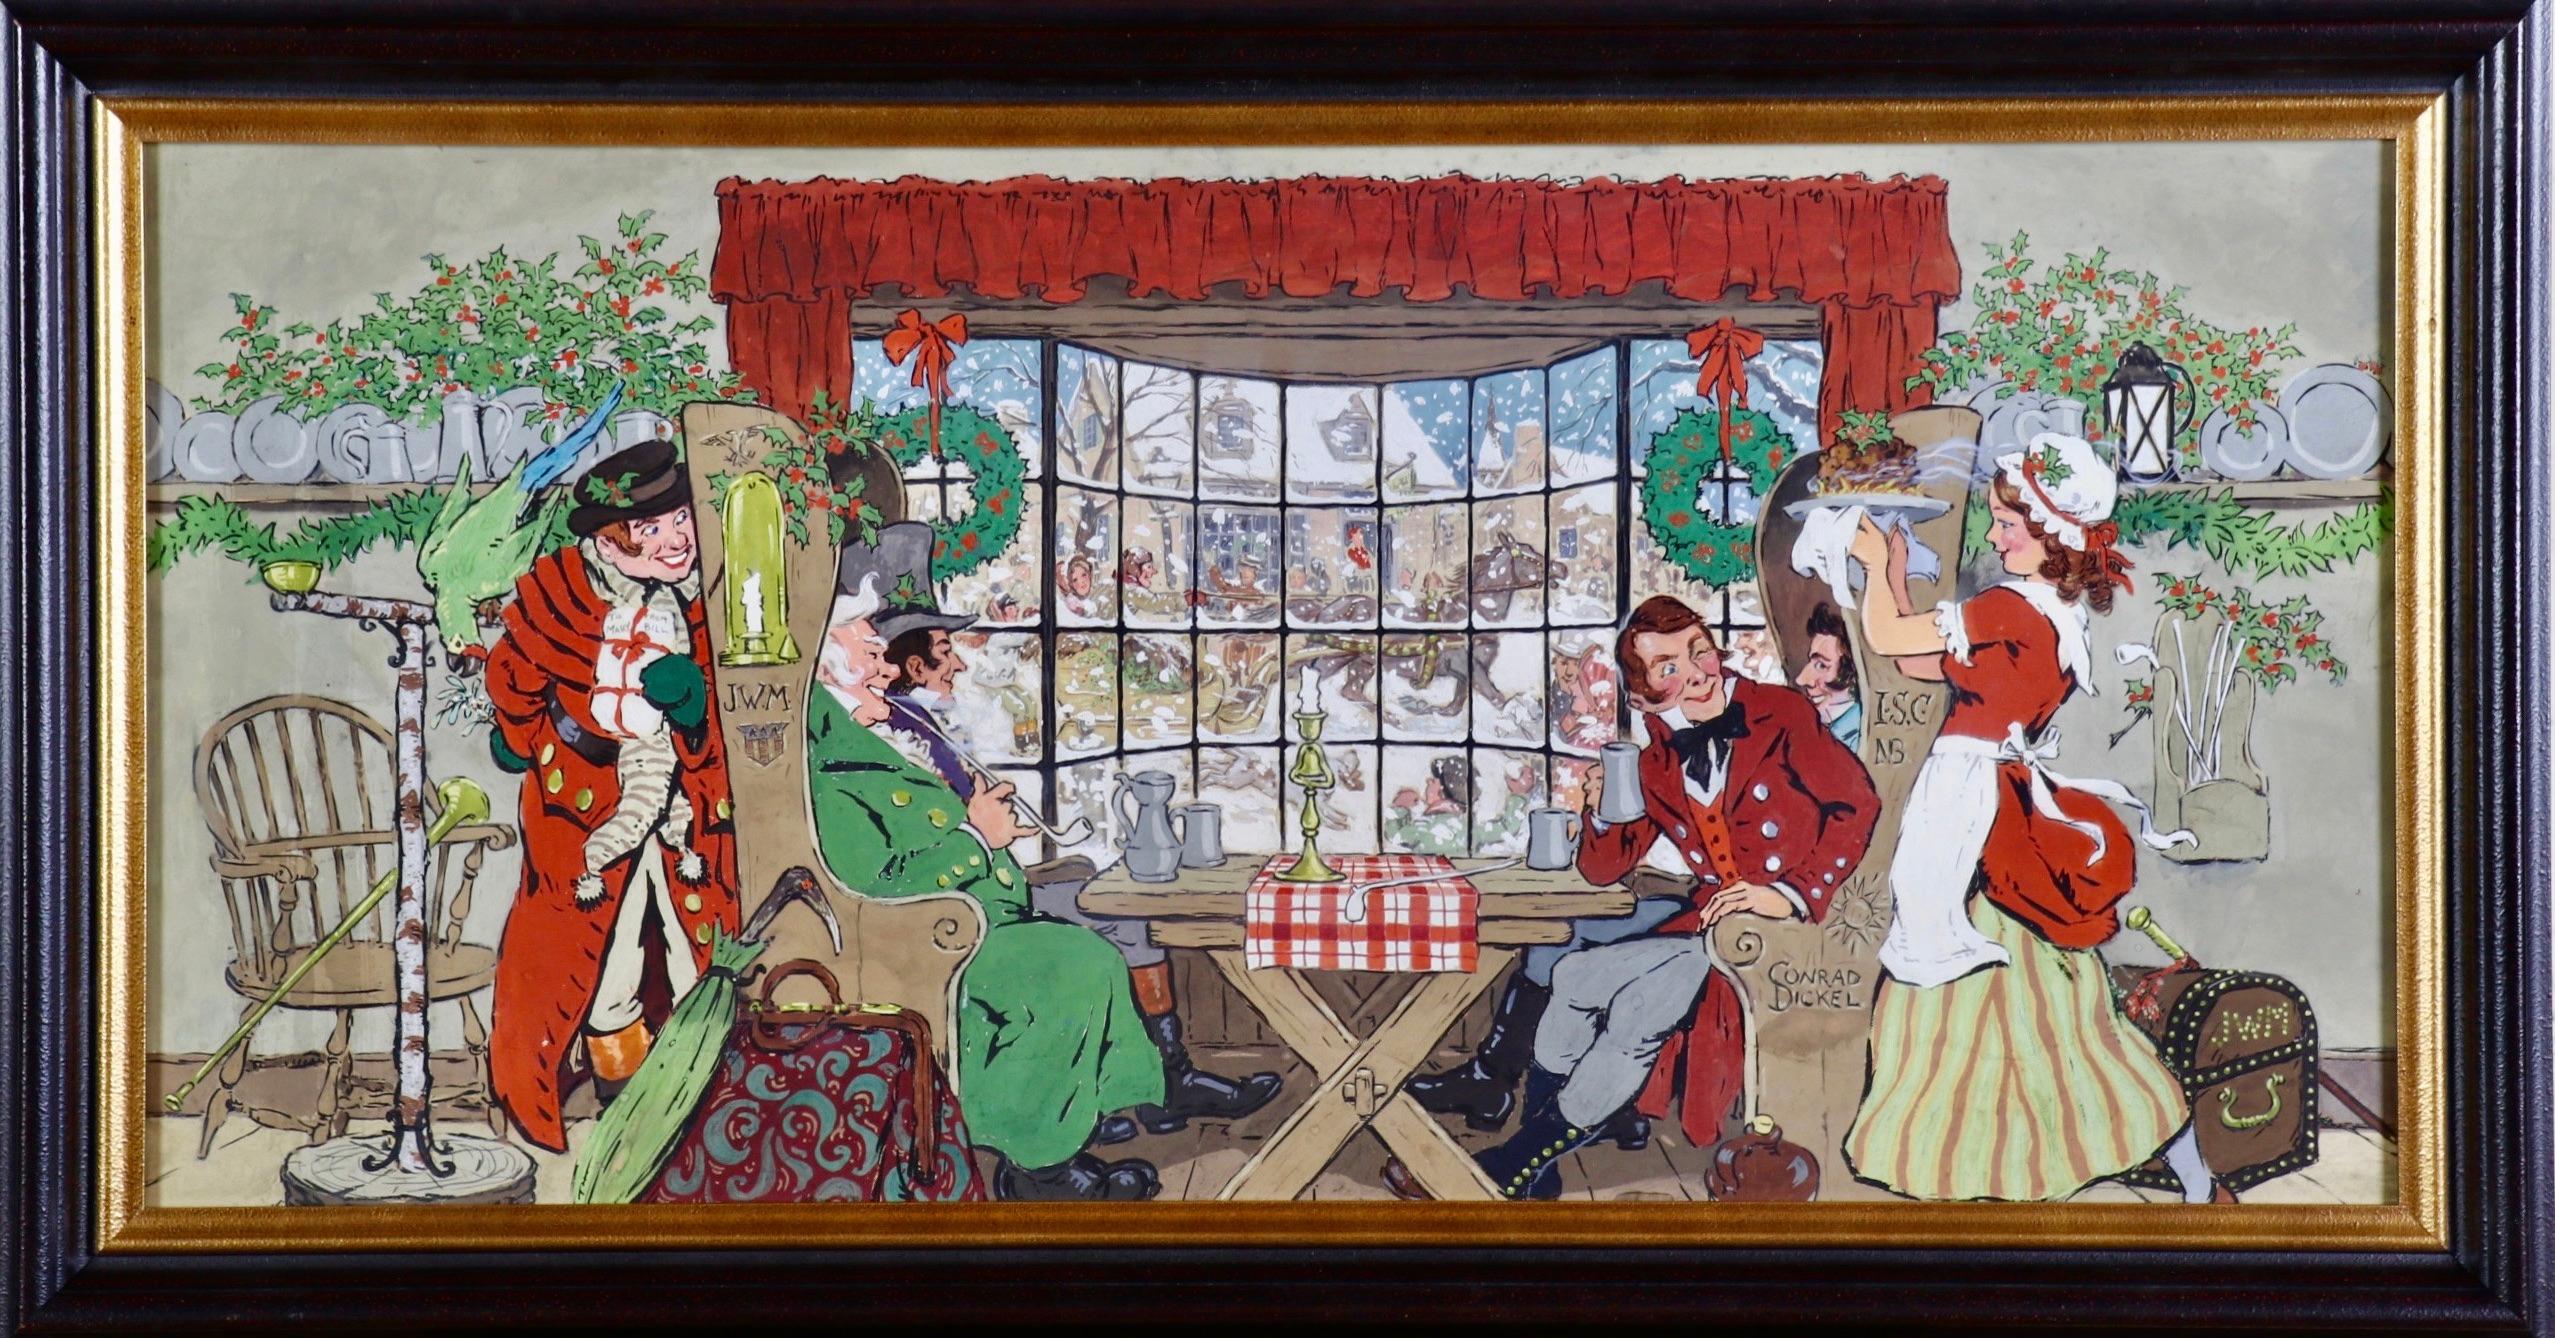 A Holiday Tavern Scene - Painting by Conrad Dickel